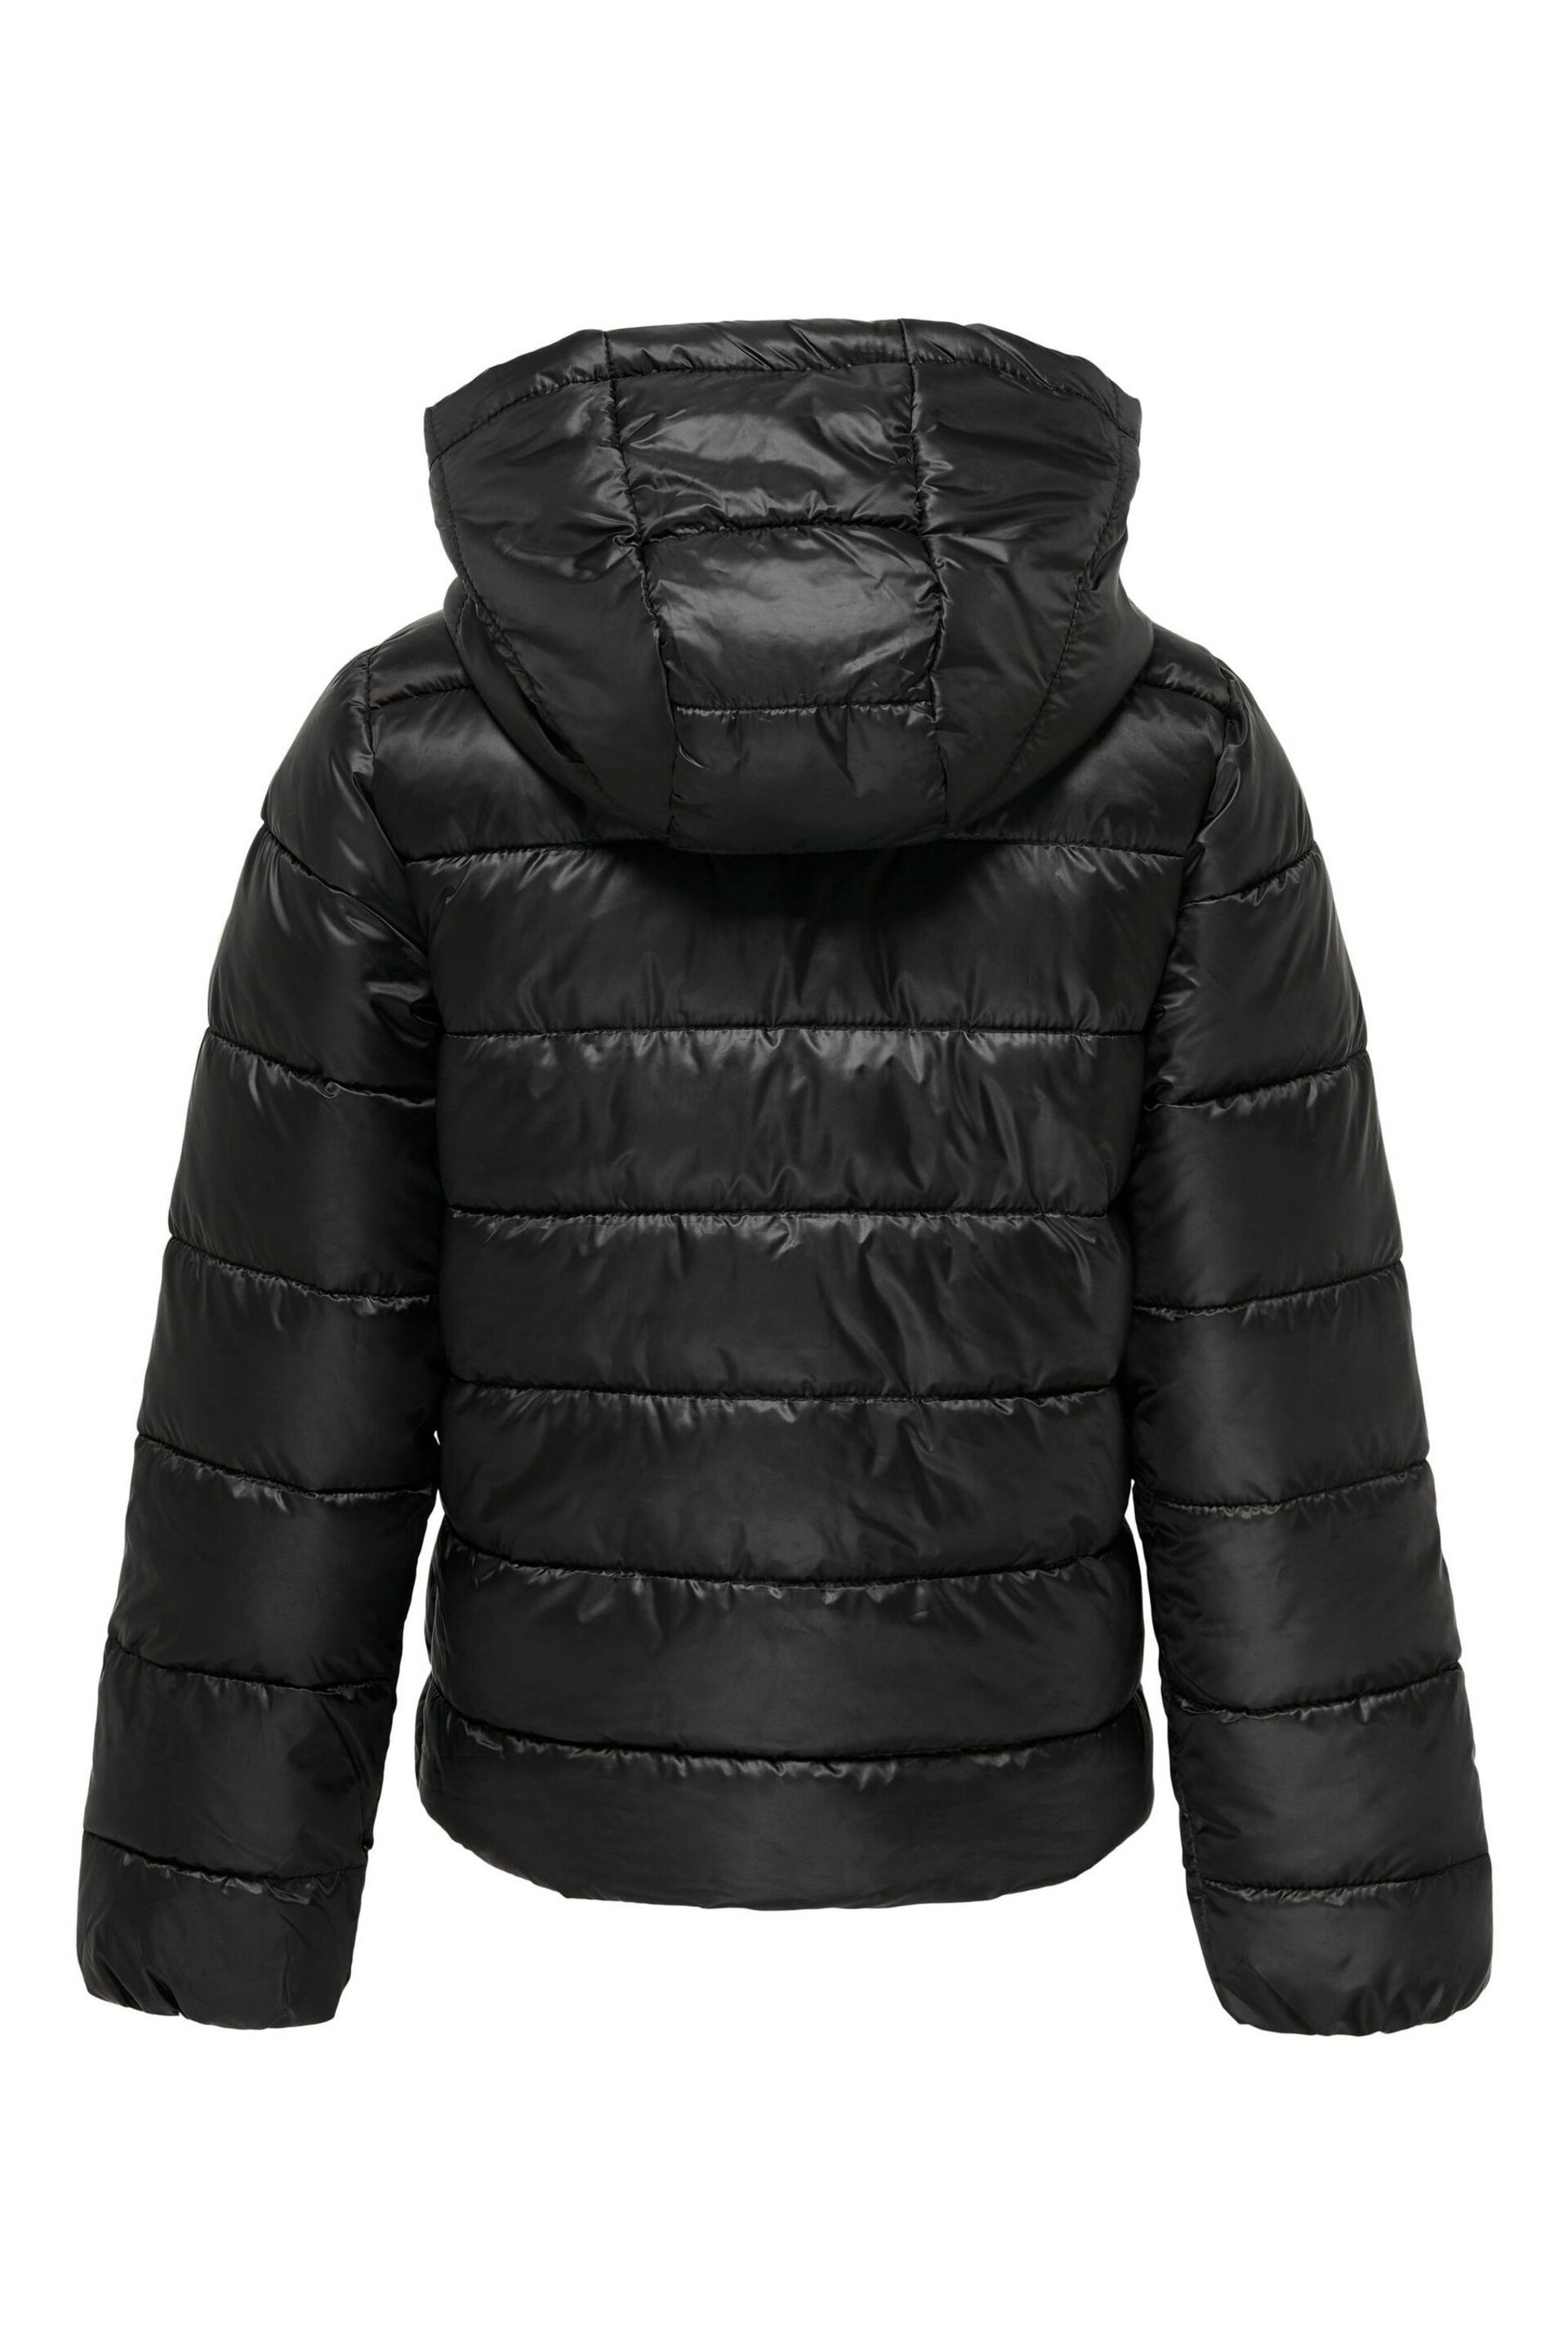 ONLY KIDS Zip Up Hooded Coat - Image 2 of 2